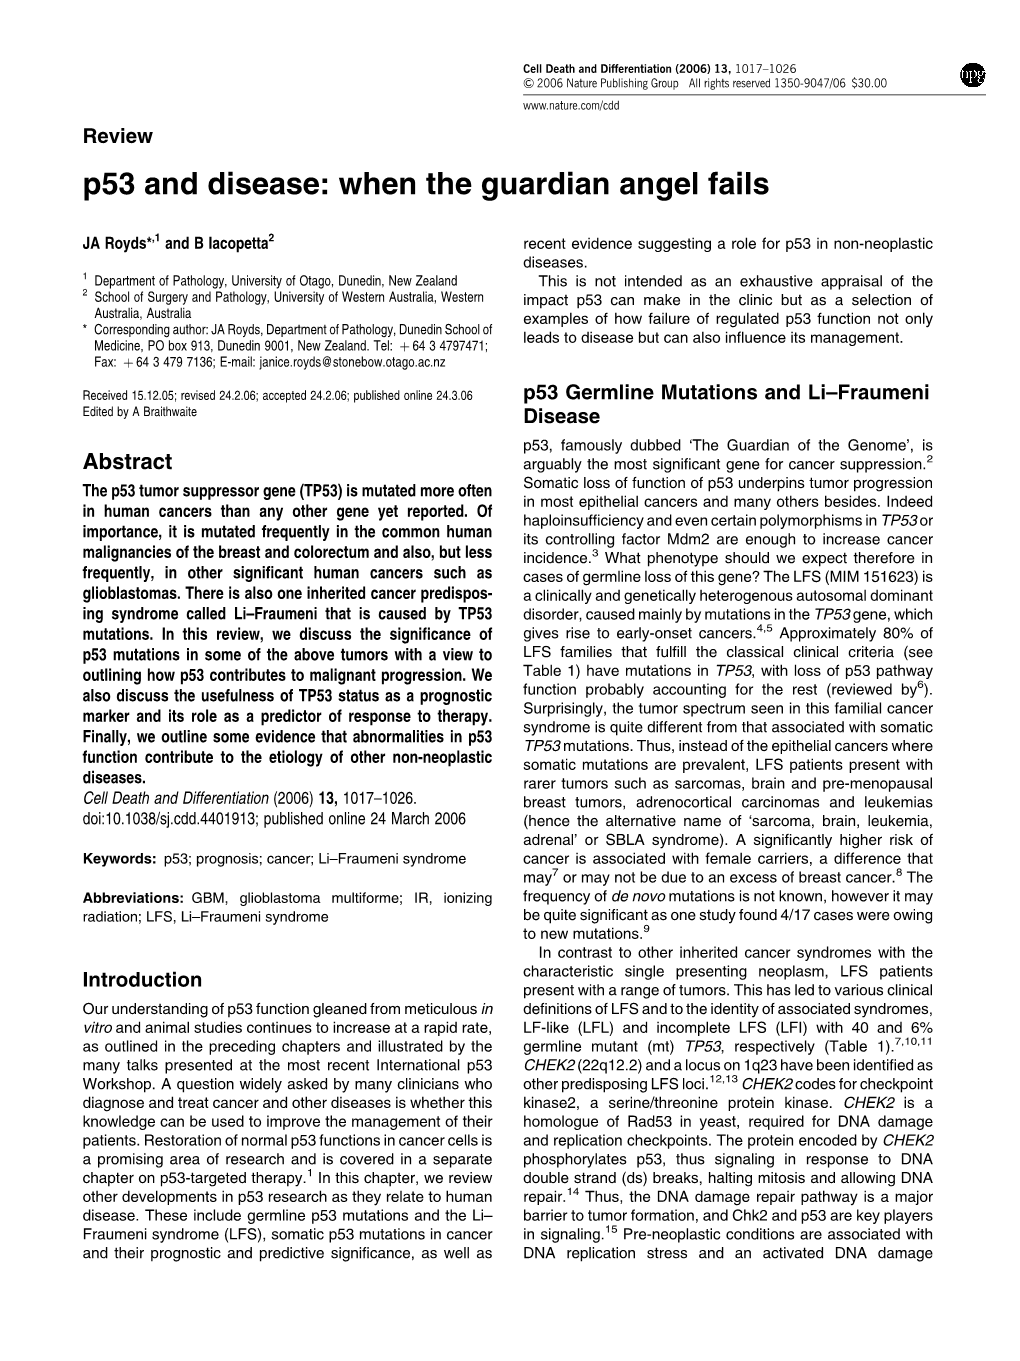 P53 and Disease: When the Guardian Angel Fails